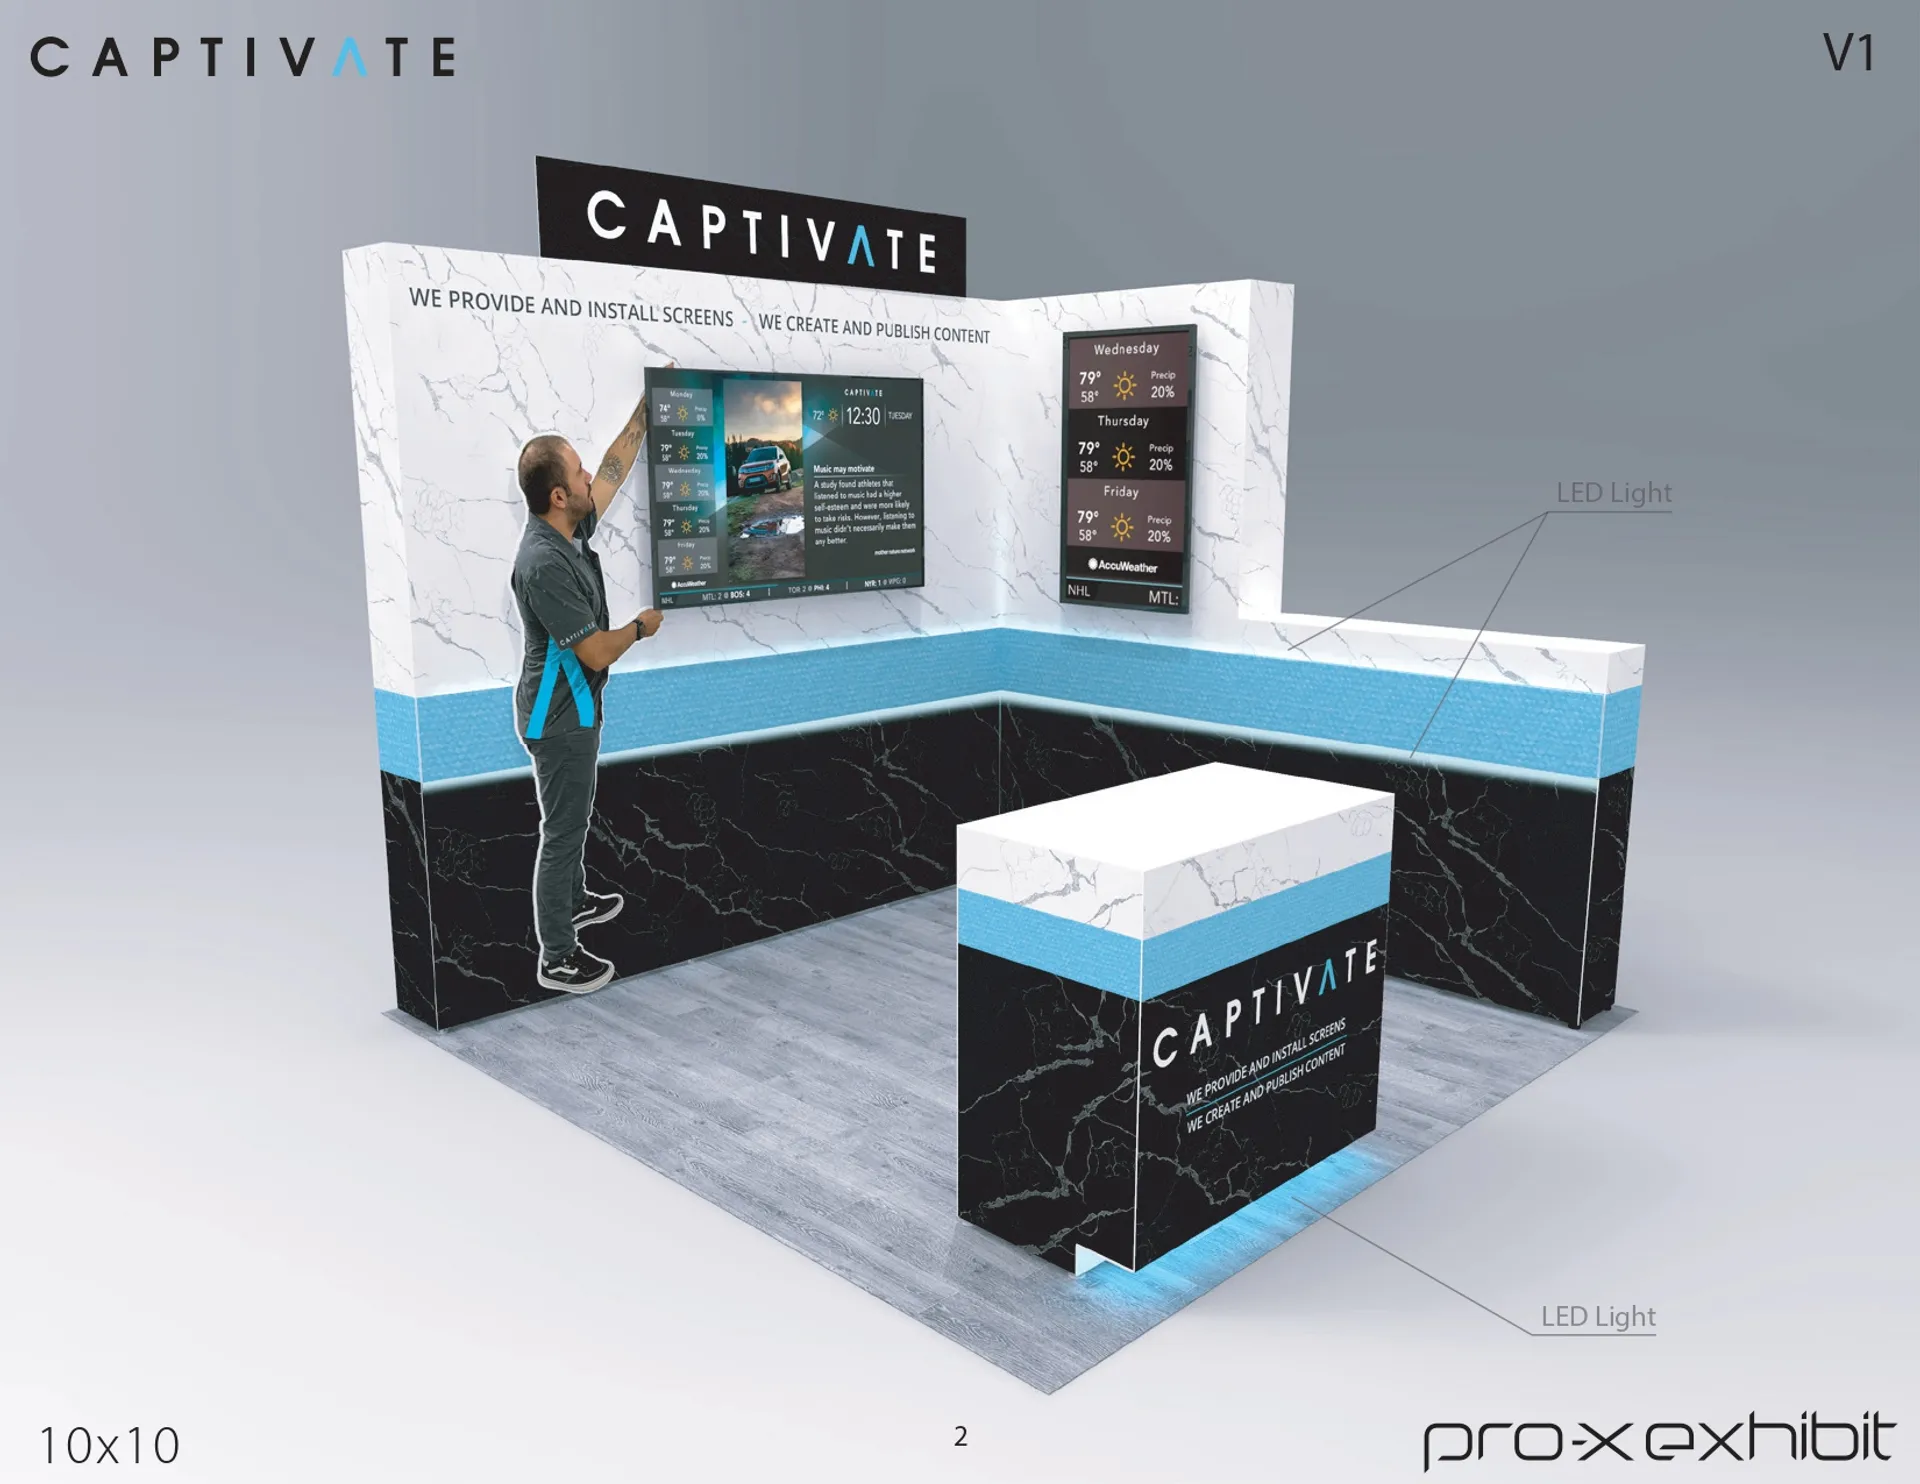 booth-design-projects/Pro-X Exhibits/2024-04-18-10x10-PERIMETER-Project-114/Captivate_10x10_NAA_Pro-X_Exhibit_V1-2_page-0001-zvnlxh.jpg